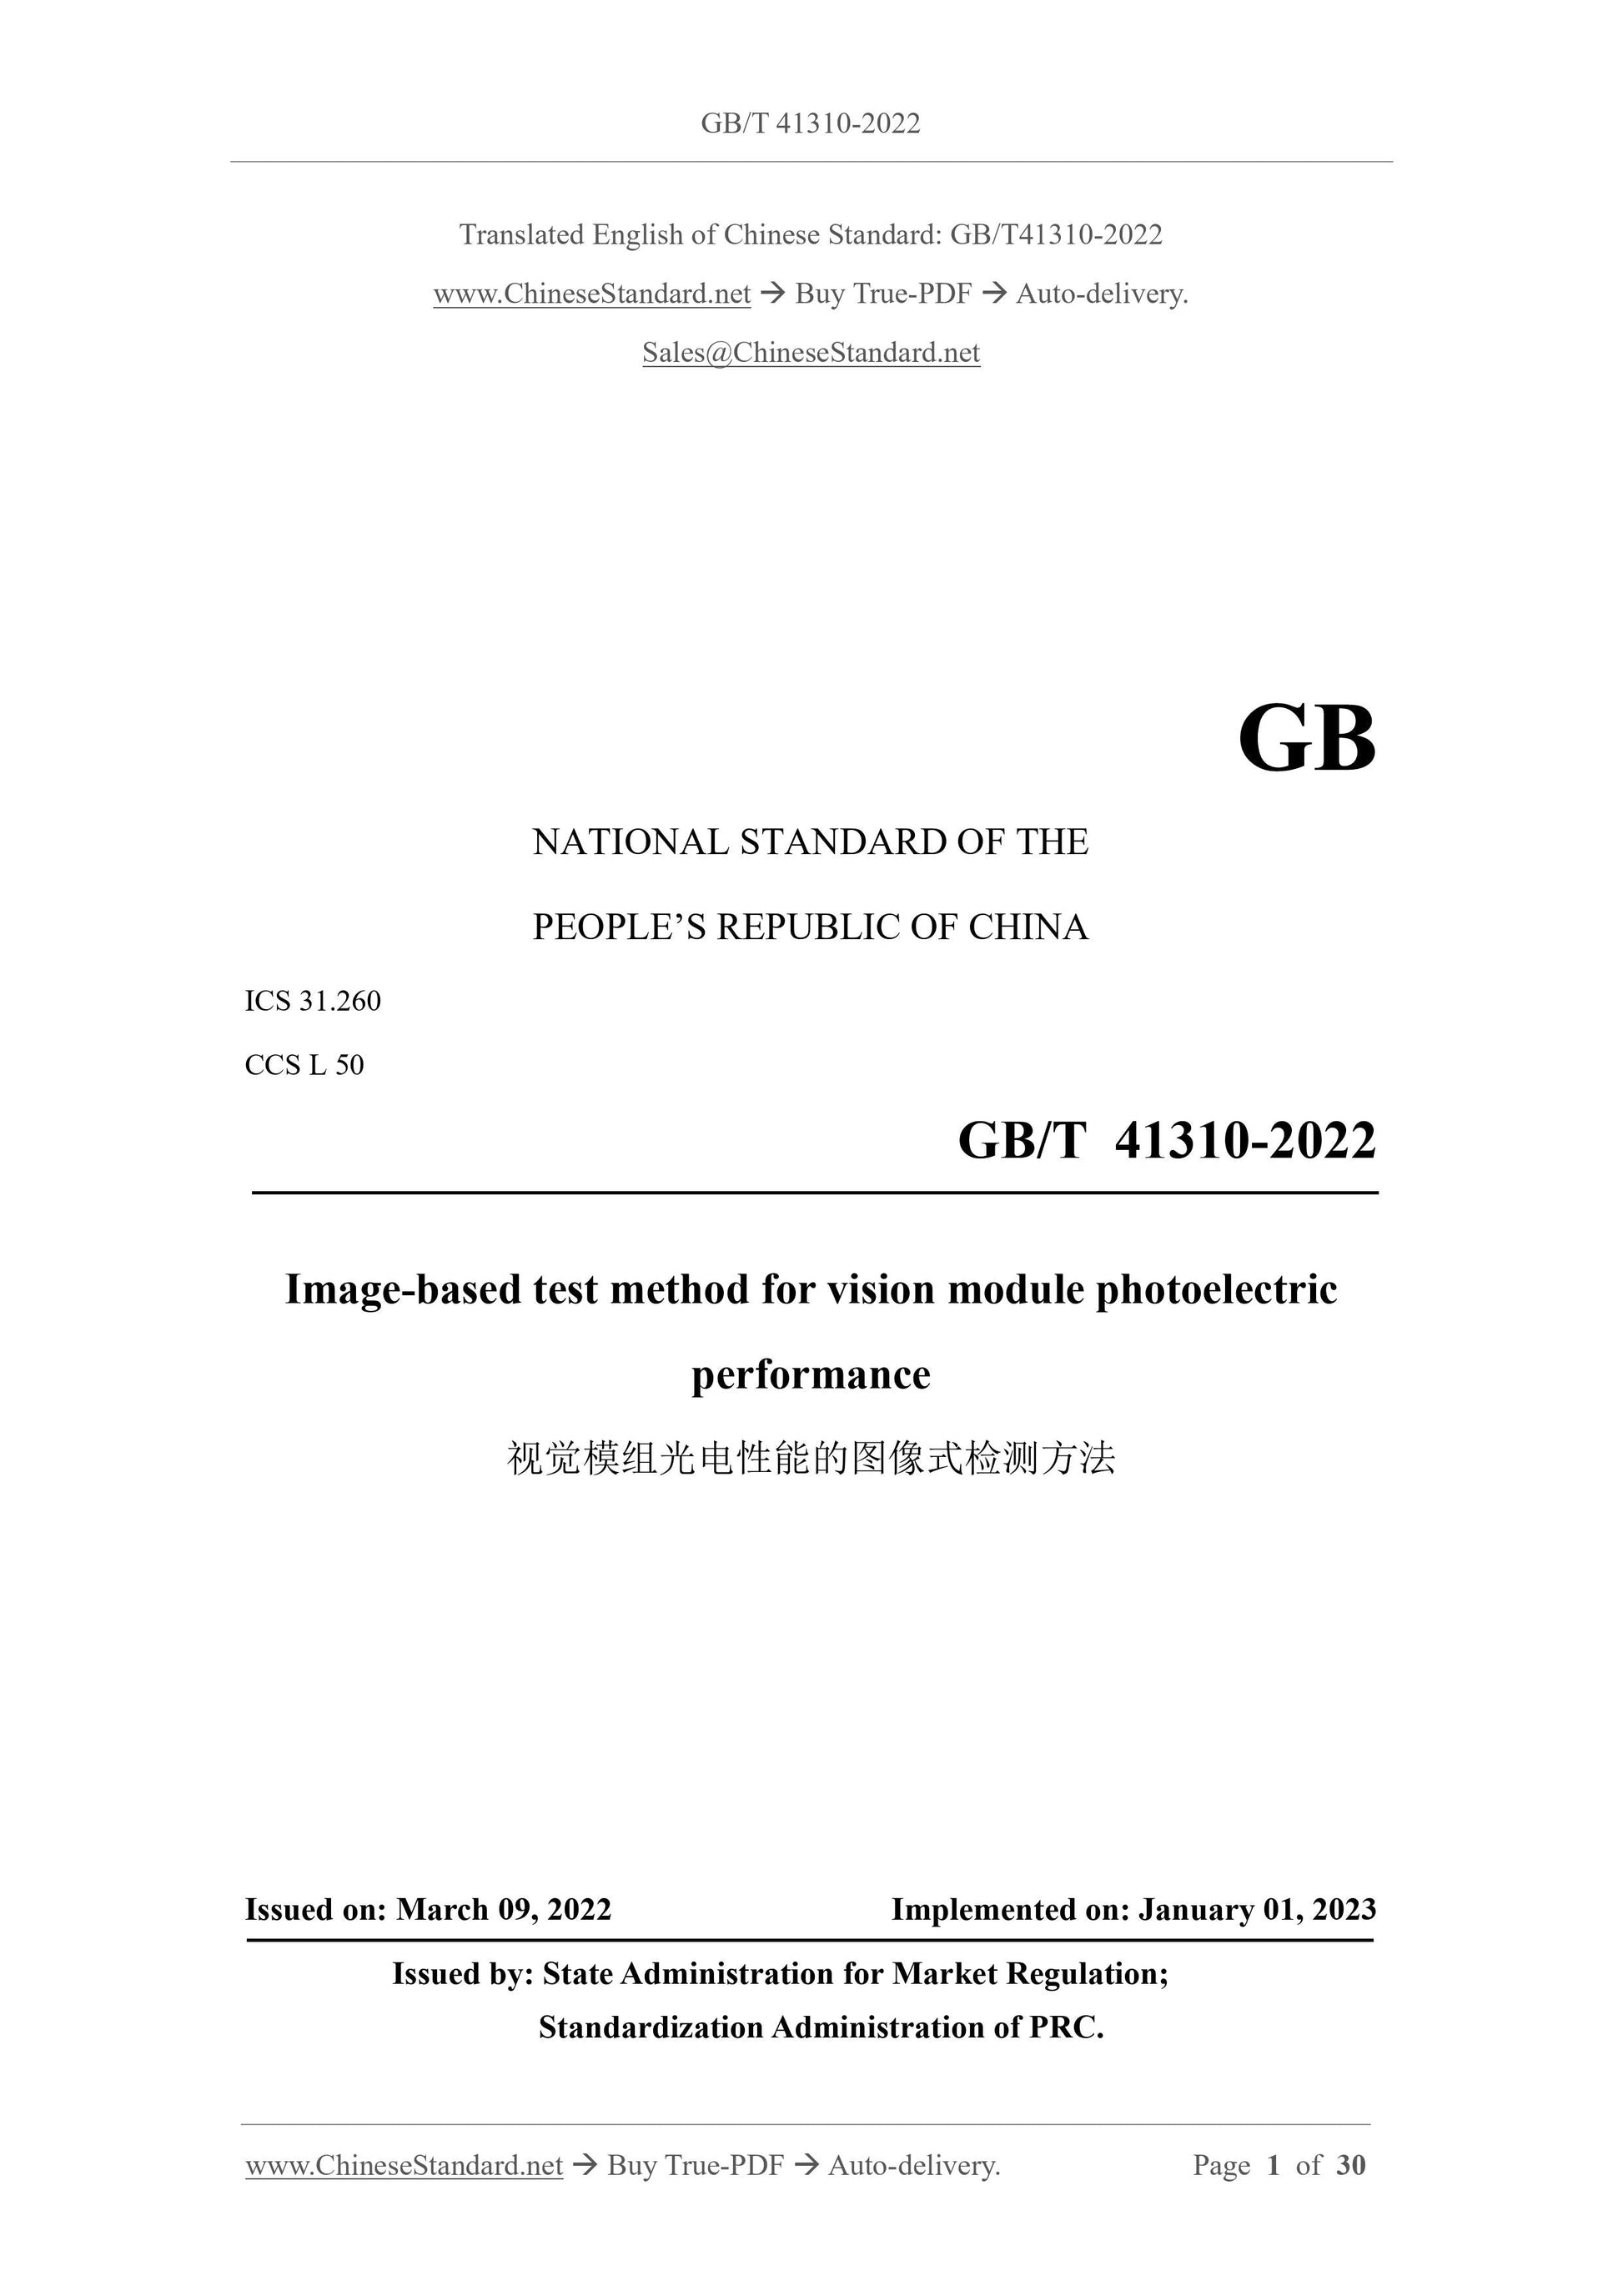 GB/T 41310-2022 Page 1